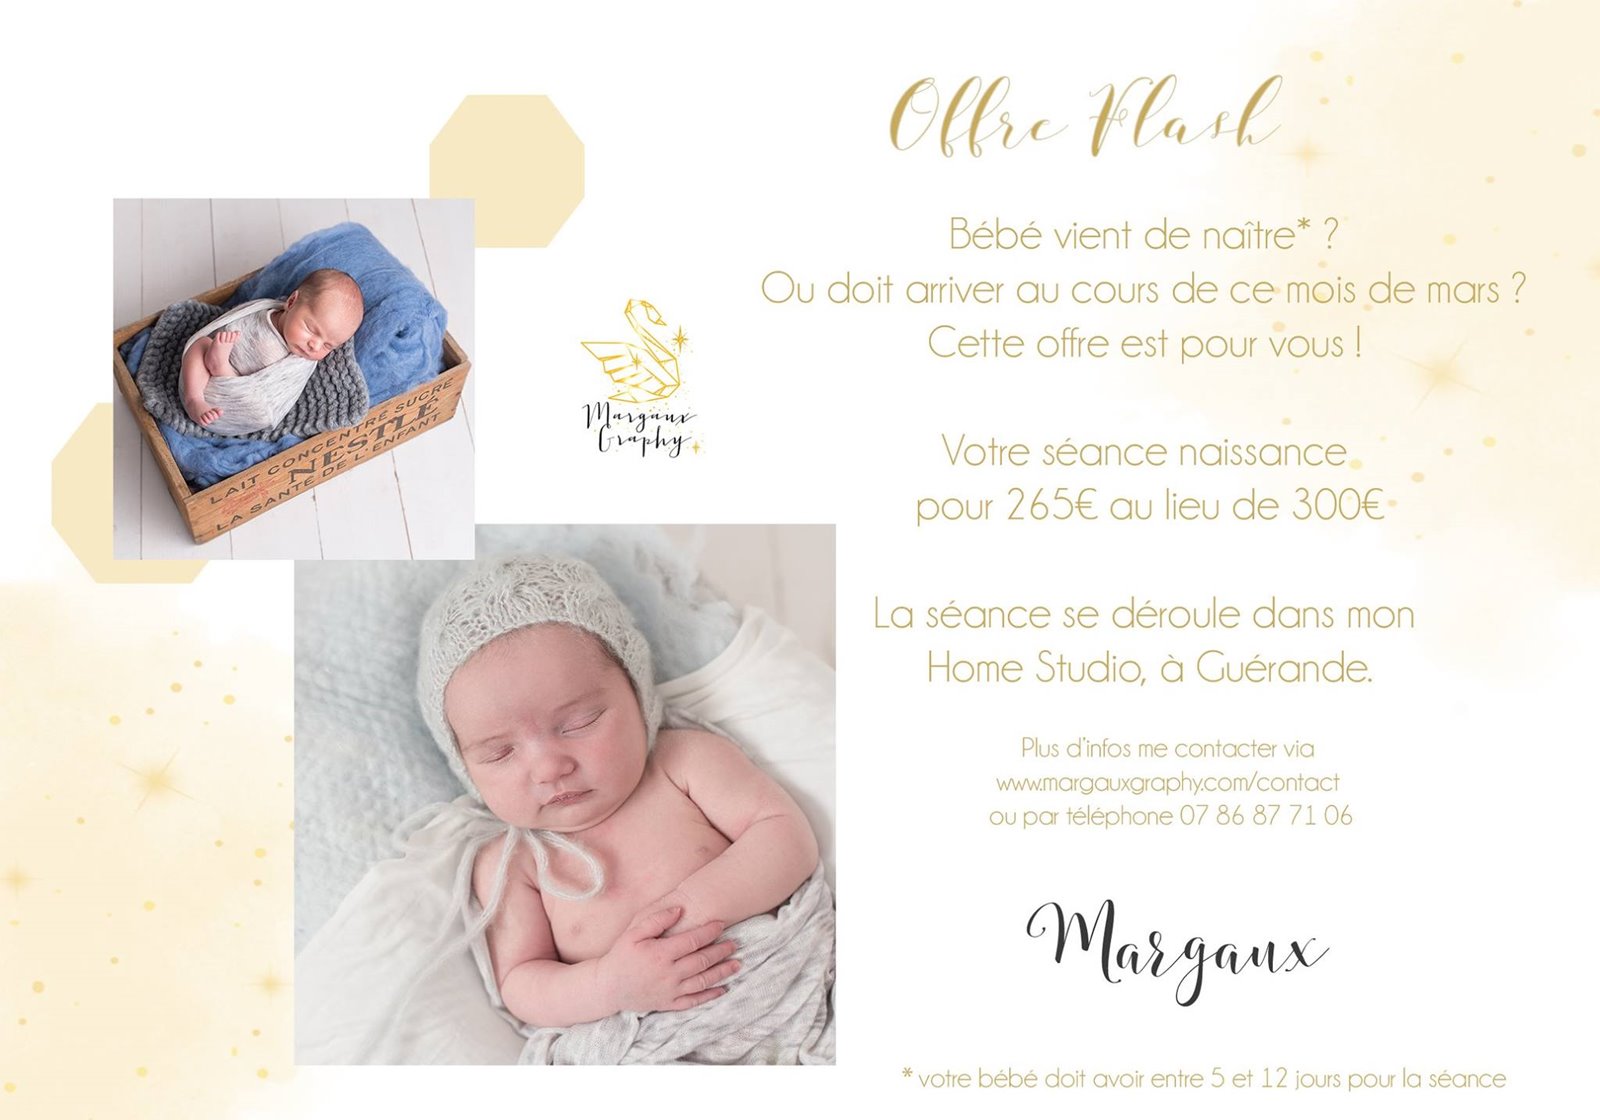 Margaux graphy interview offre flash